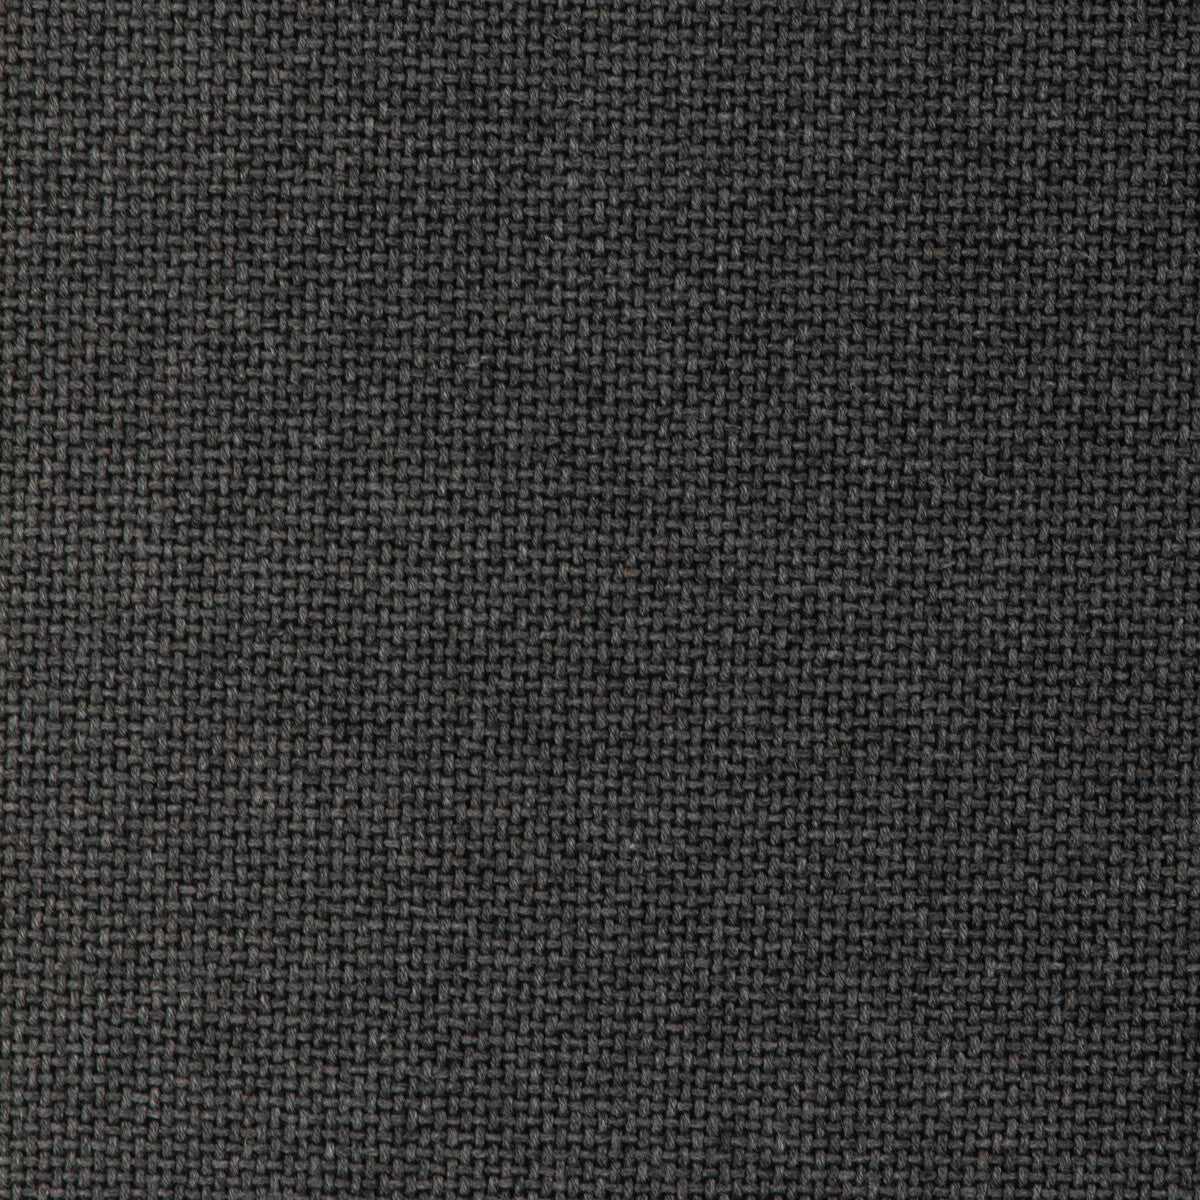 Easton Wool fabric in carbon color - pattern 37027.2121.0 - by Kravet Contract